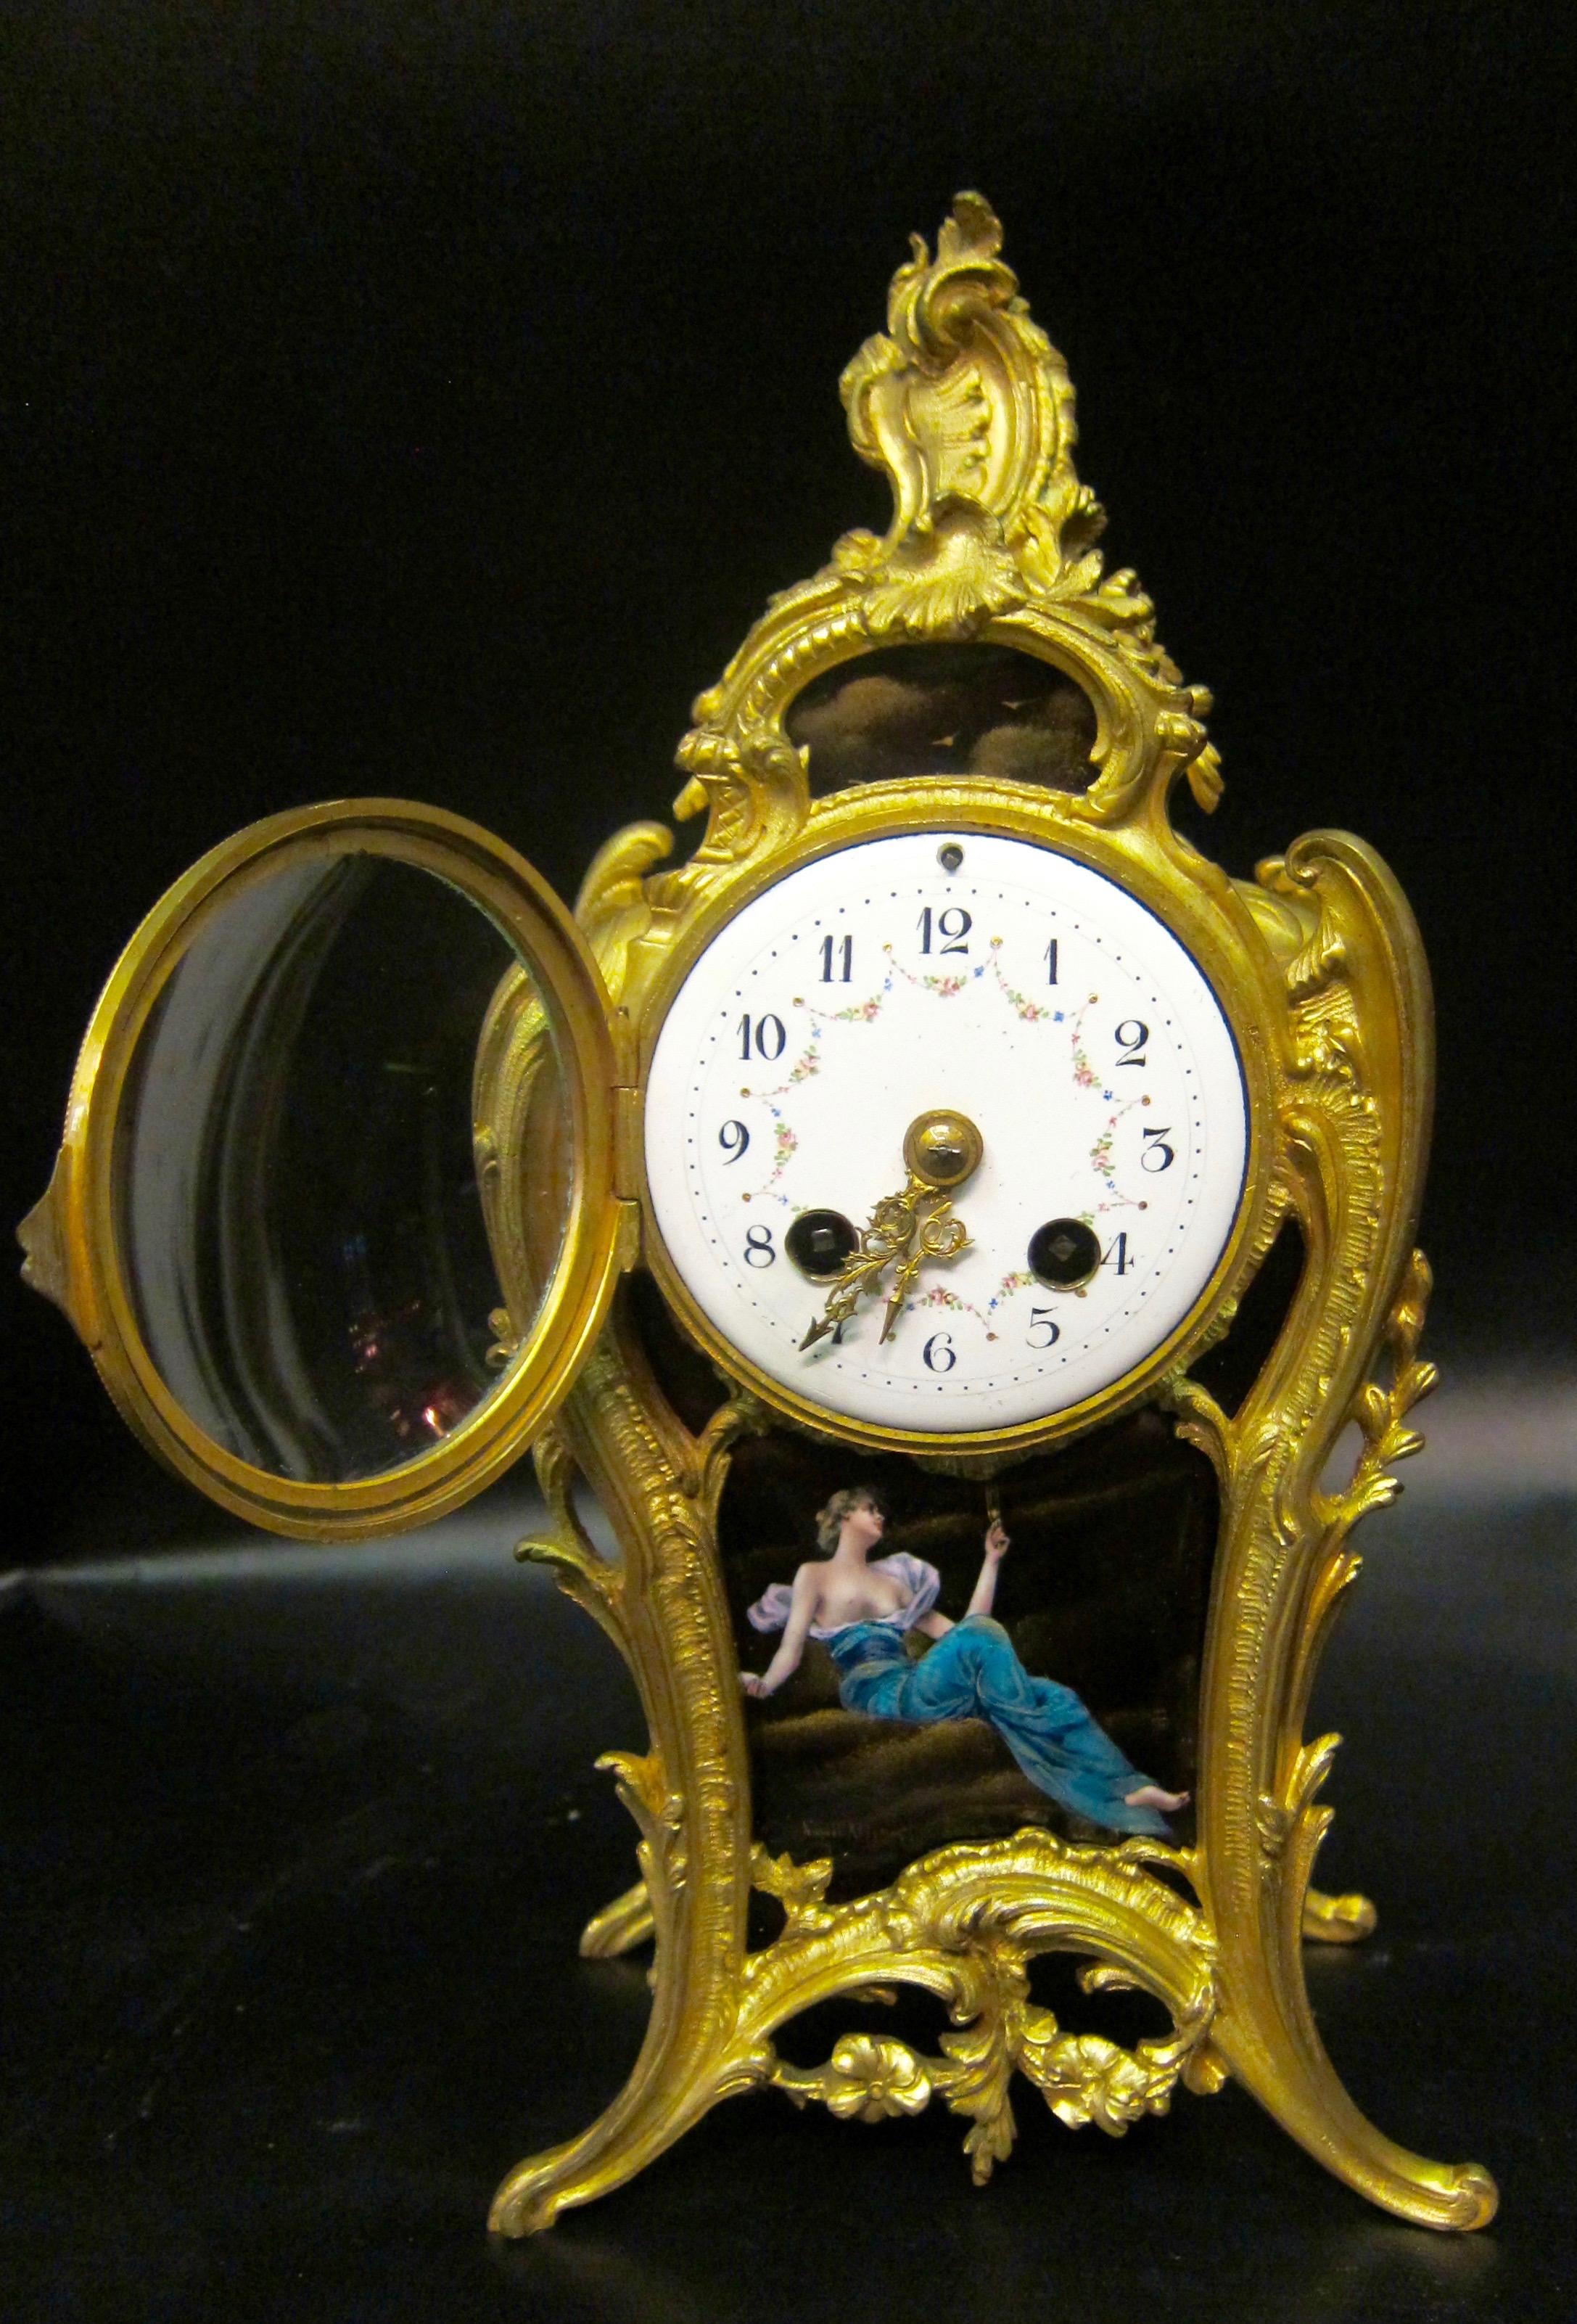 Vintage Mid-19th Century French Gilt Bronze and Enamel Boudoir Clock For Sale 3